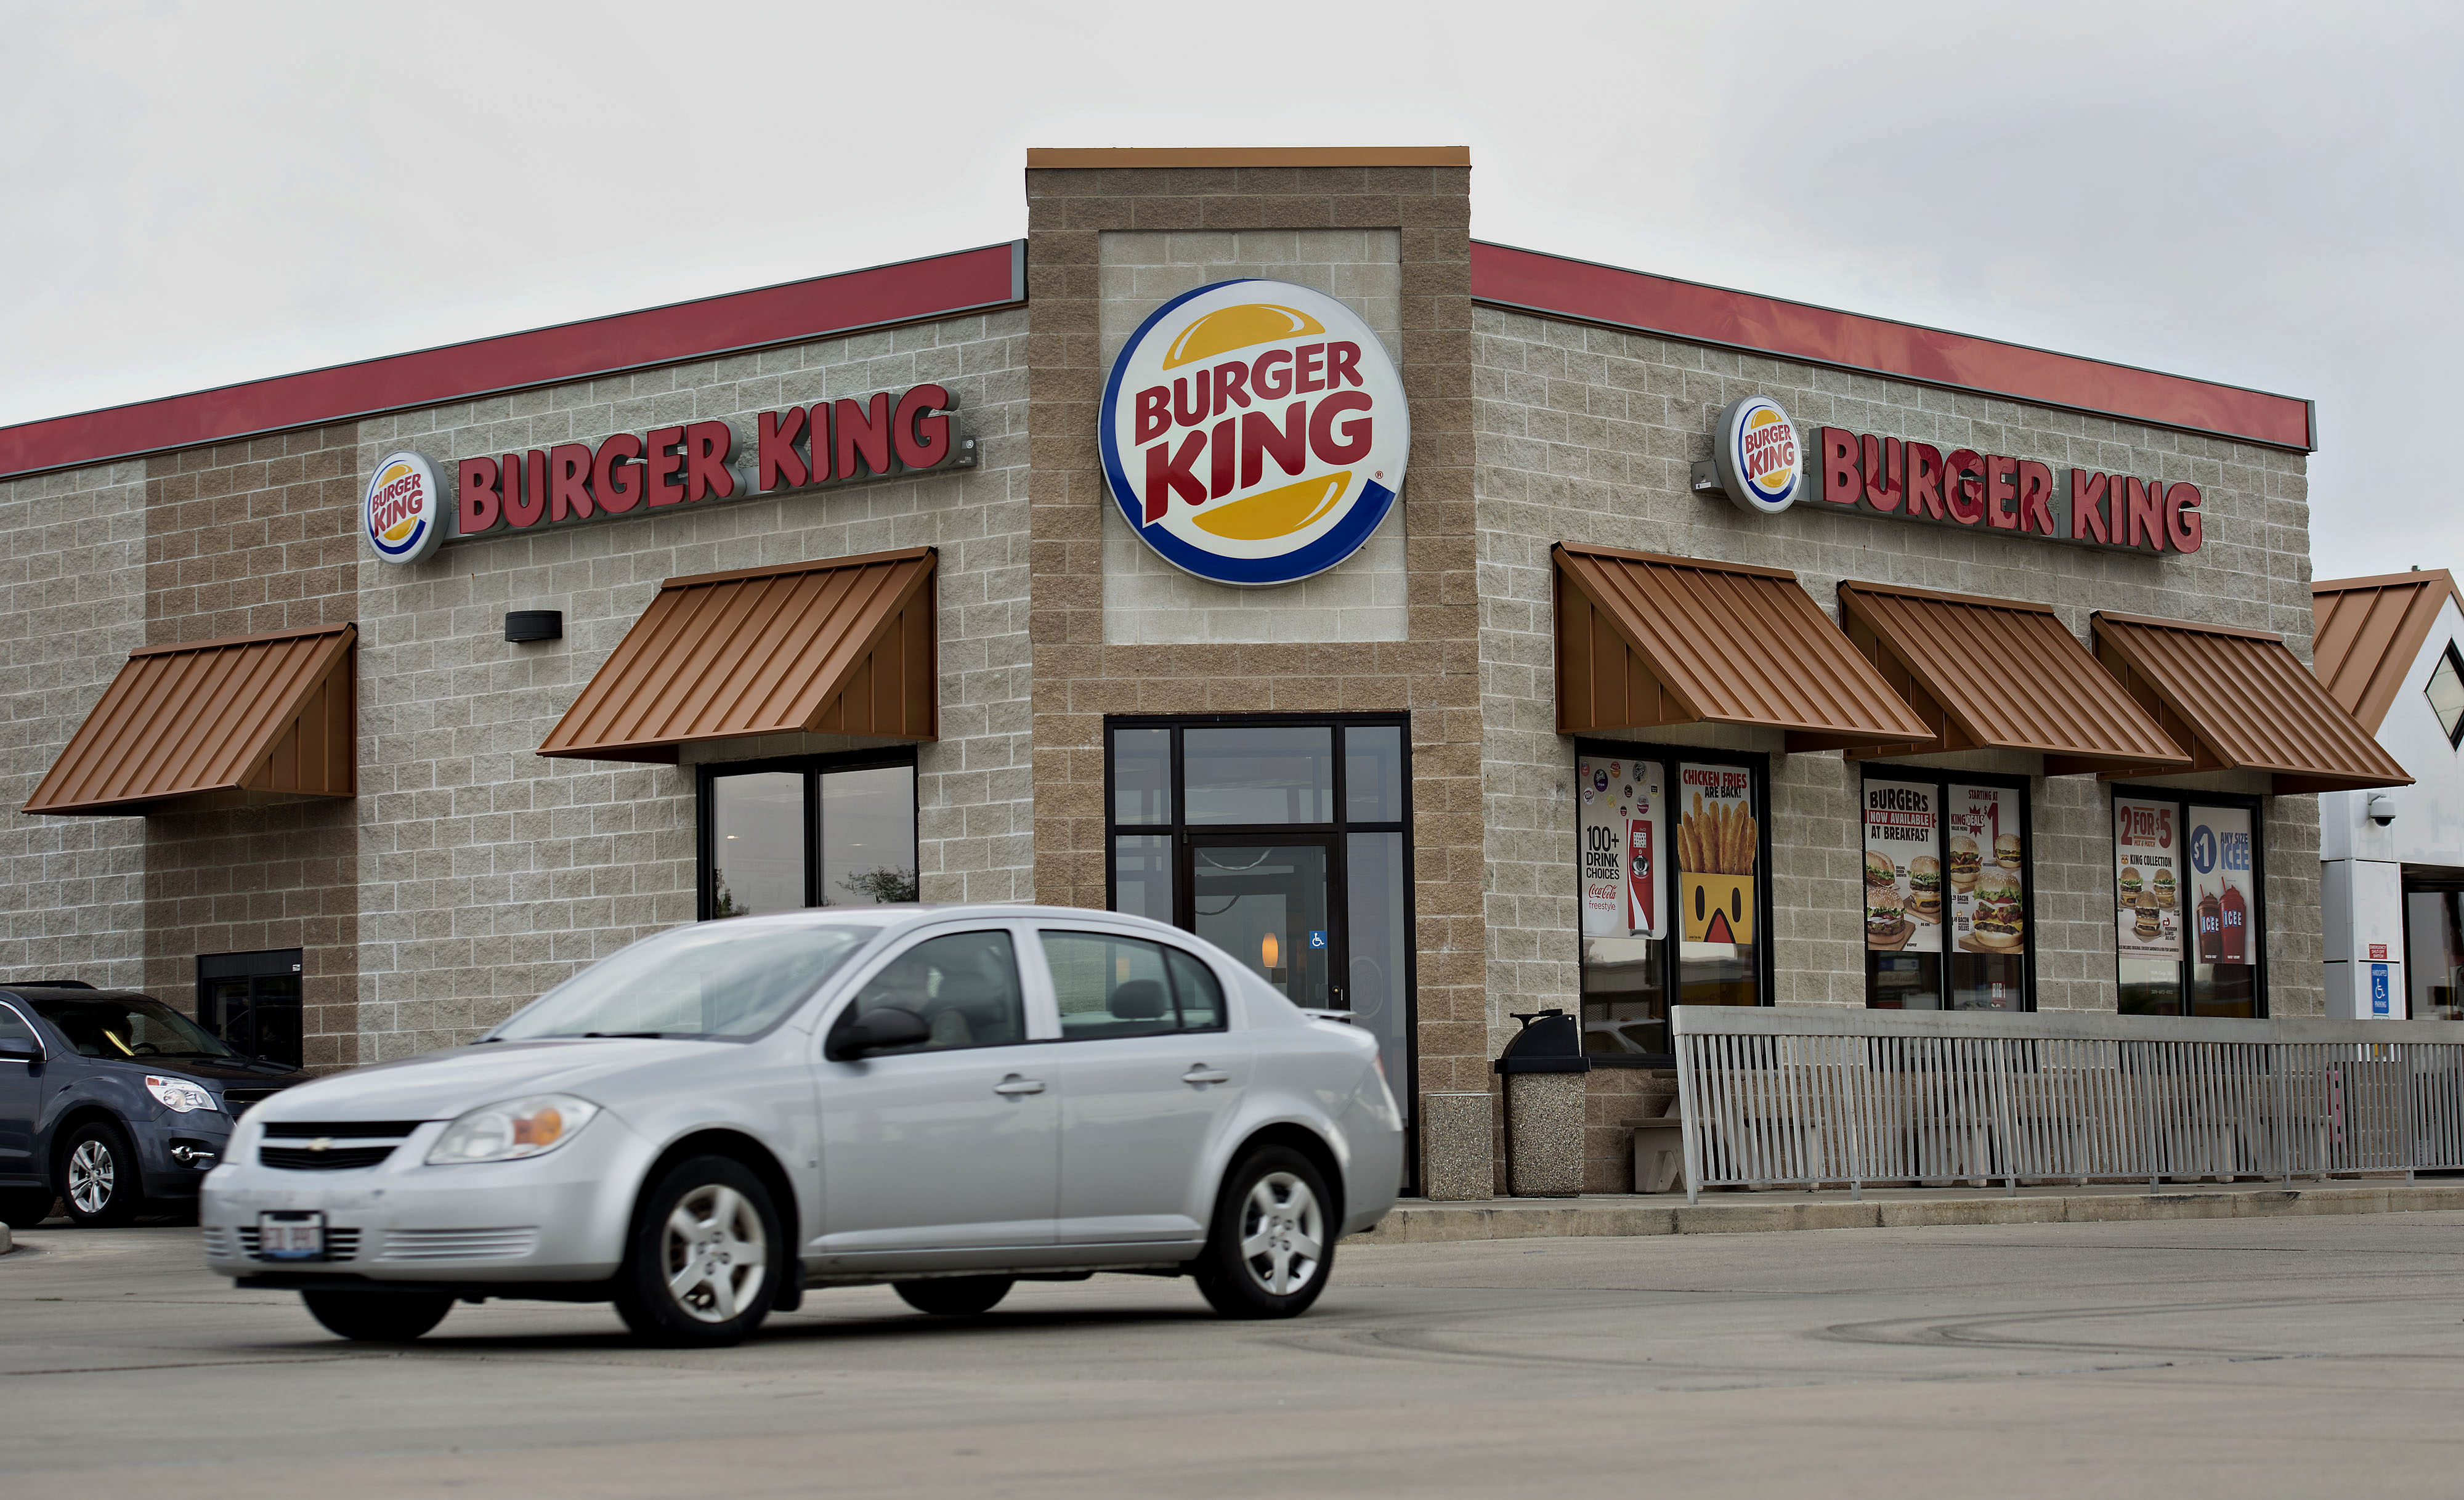 A vehicle drives past a Burger King Worldwide Inc. restaurant in Peoria, Illinois, U.S., on Tuesday, Aug. 26, 2014. Burger King Worldwide Inc. agreed to acquire Tim Hortons Inc. for about C$12.5 billion ($11.4 billion) in a deal that creates the third-largest fast-food company and moves its headquarters to Canada. (Bloomberg&mdash;Bloomberg/Getty Images)